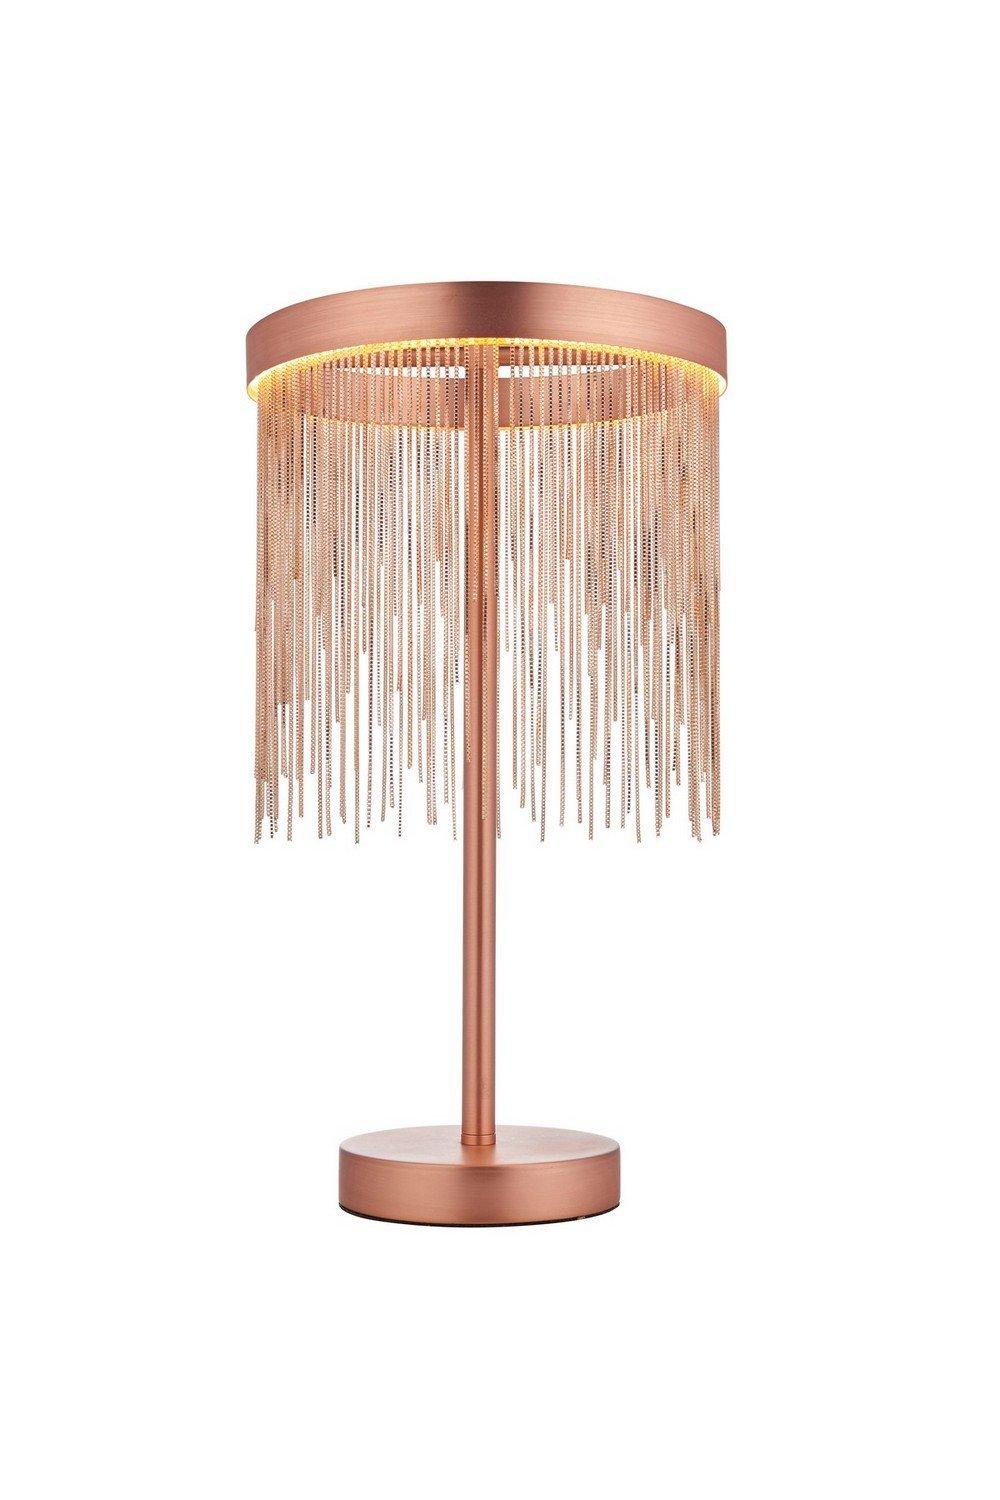 Zelma LED Table Lamp Light Fine Copper Chain Waterfall Effect Brushed Copper with Inline Switch